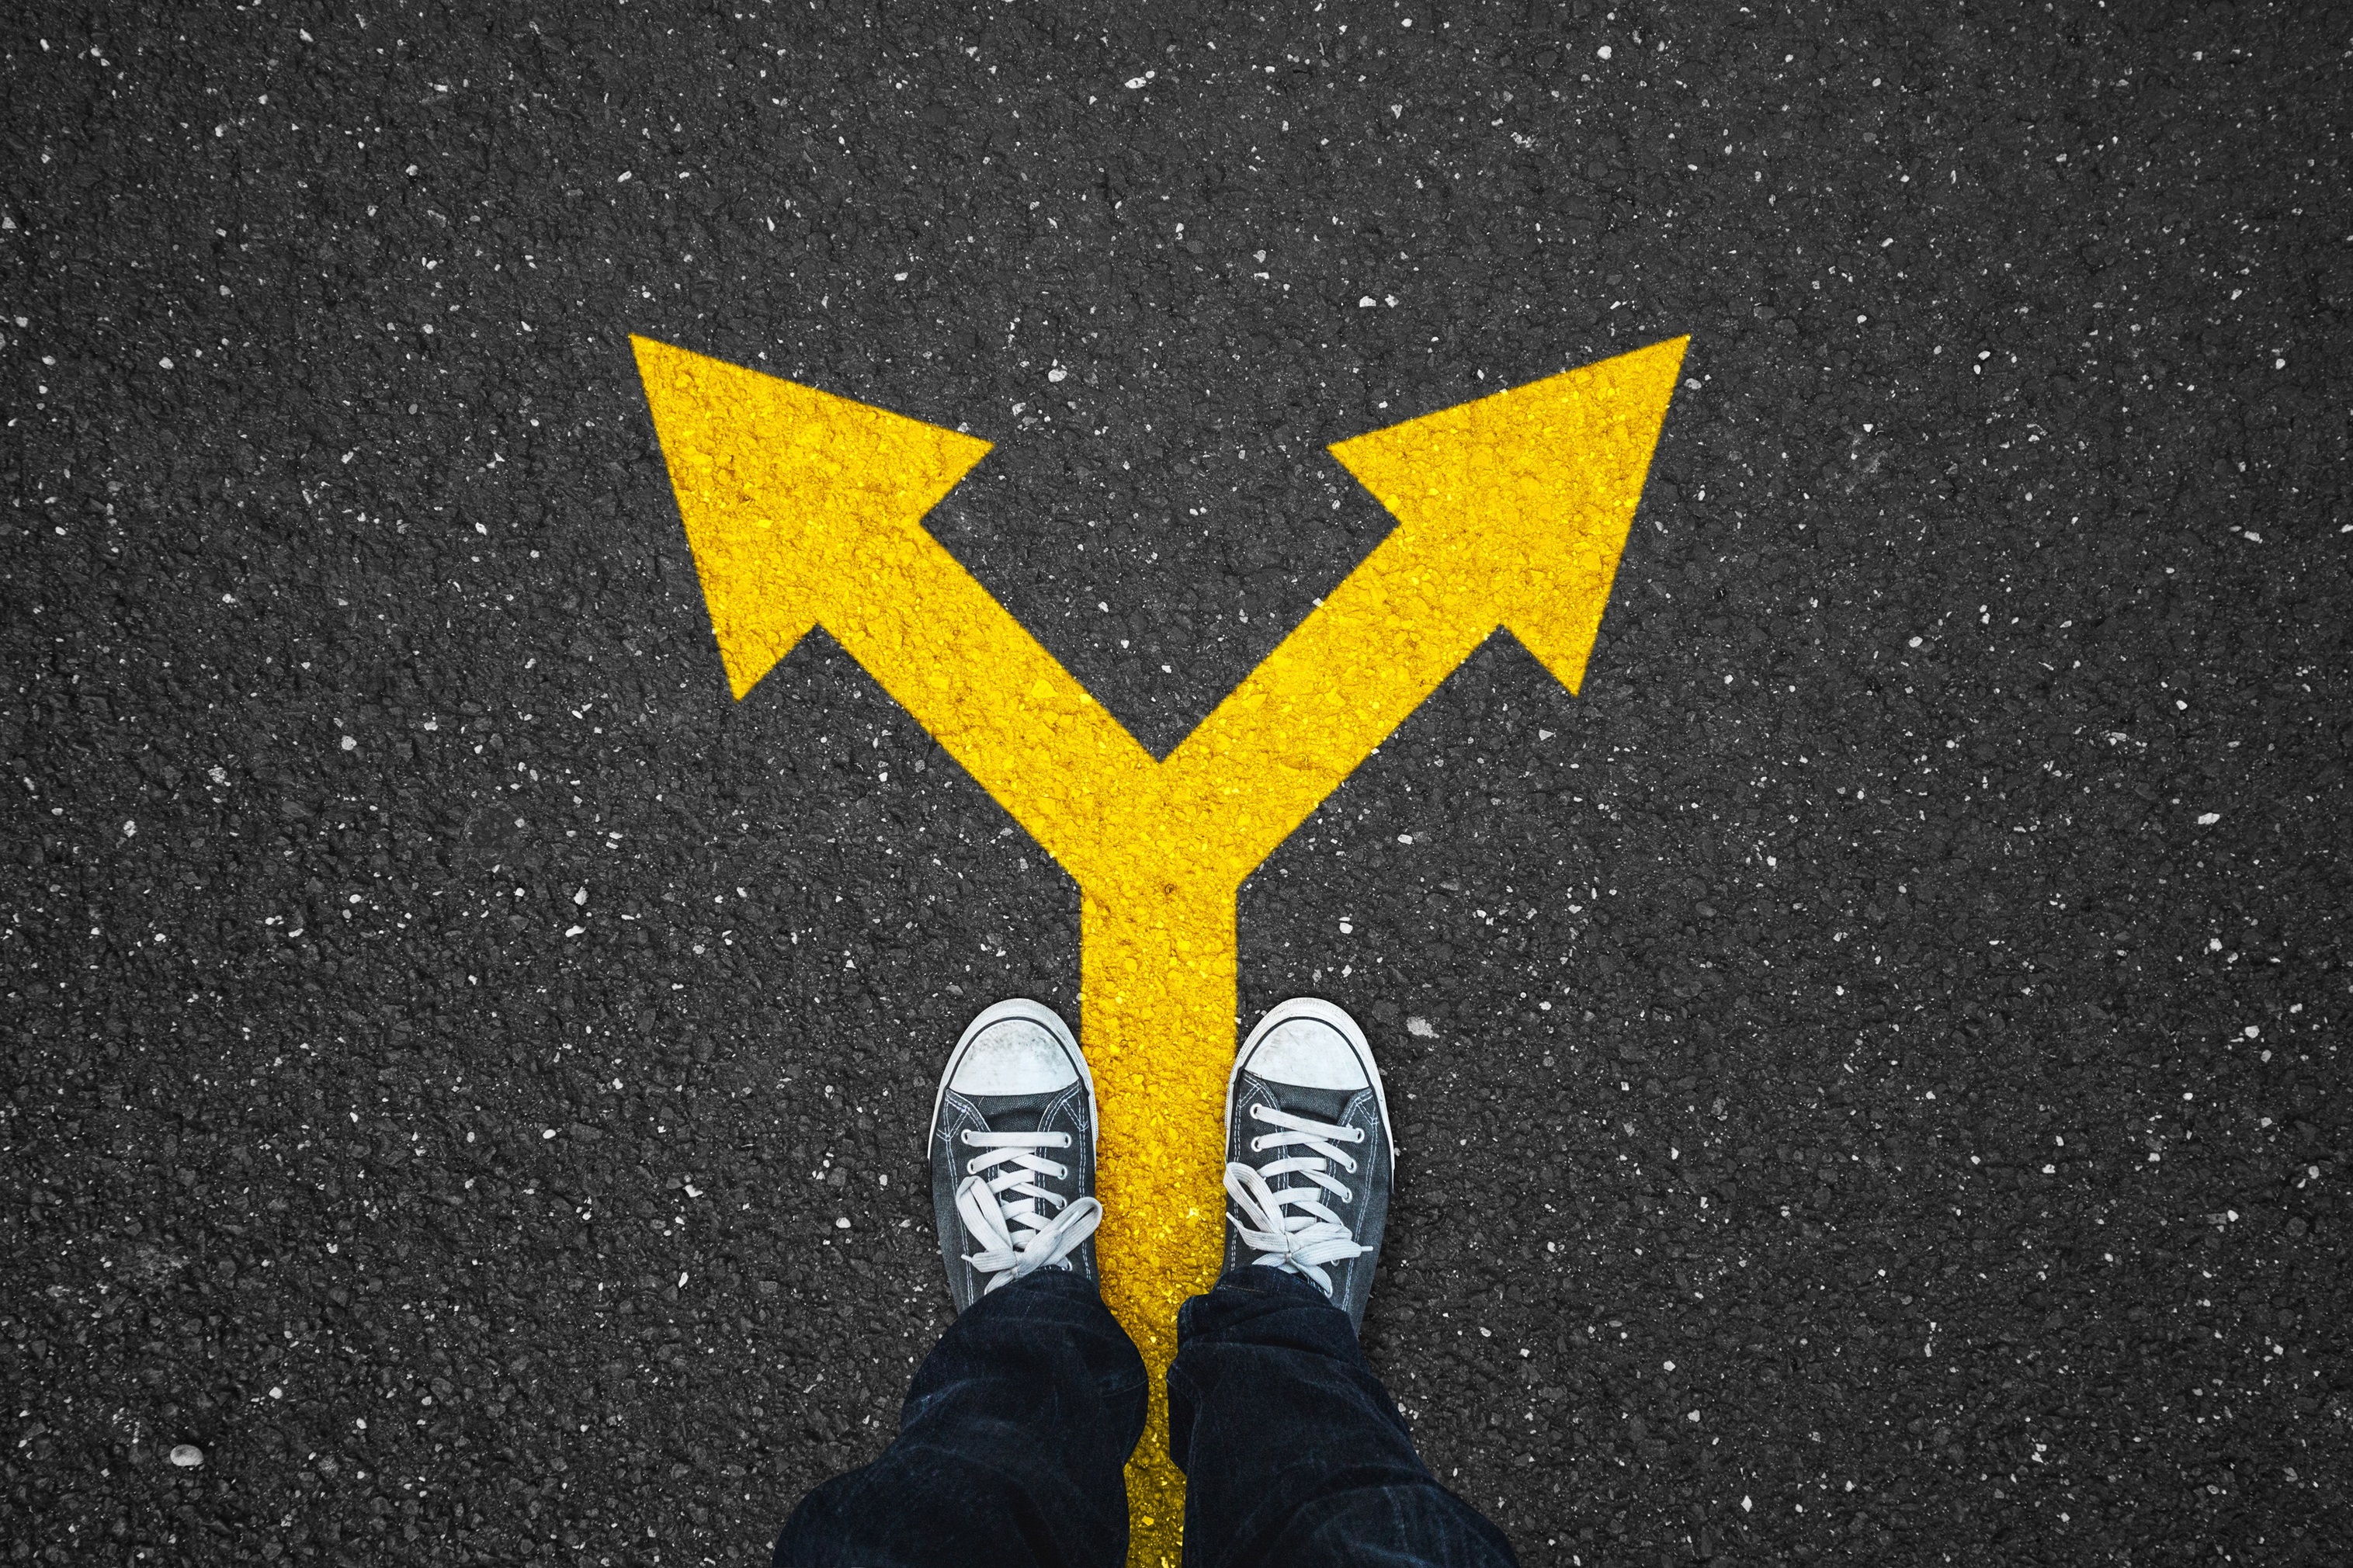 Image of two feet standing on pavement with a yellow arrow pointing in two different directions